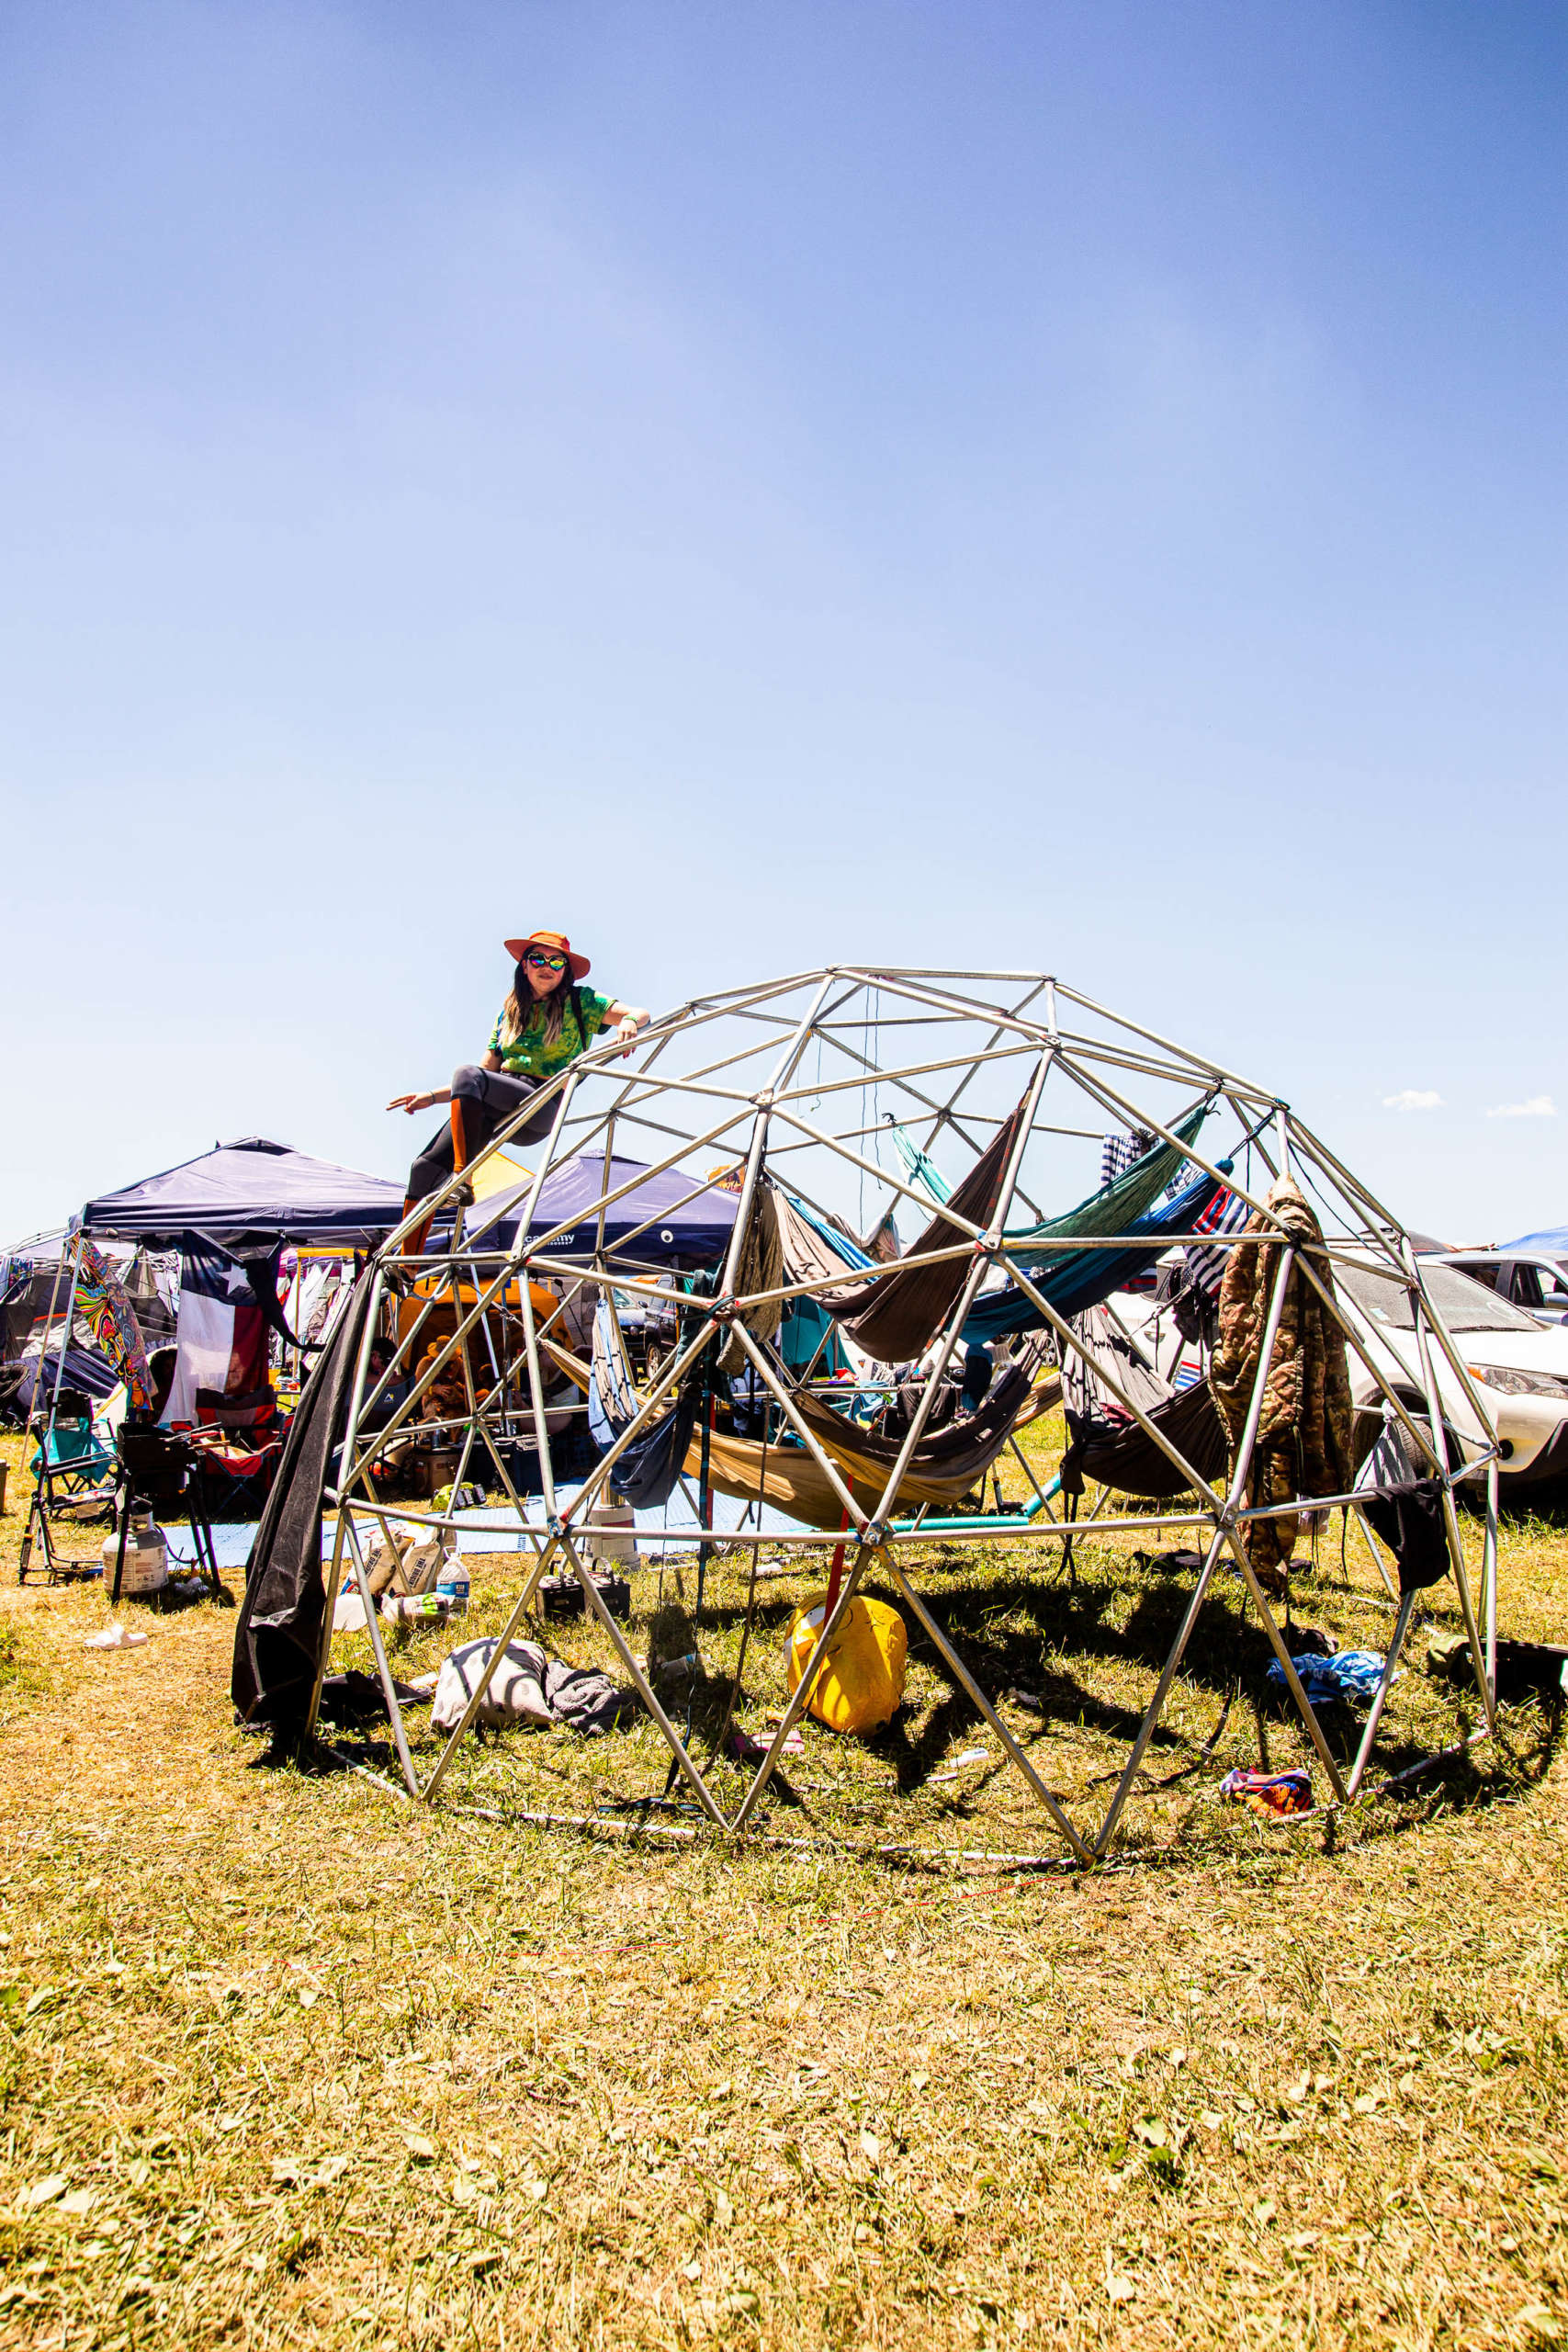 A person sits on top of a metal geodesic dome structure. Inside the dome are several multicolored hammocks hanging. Behind them are purple tents for an outdoor fair or event, with various products displayed for sale. It is a sunny summer day and cars are parked behind the tents.